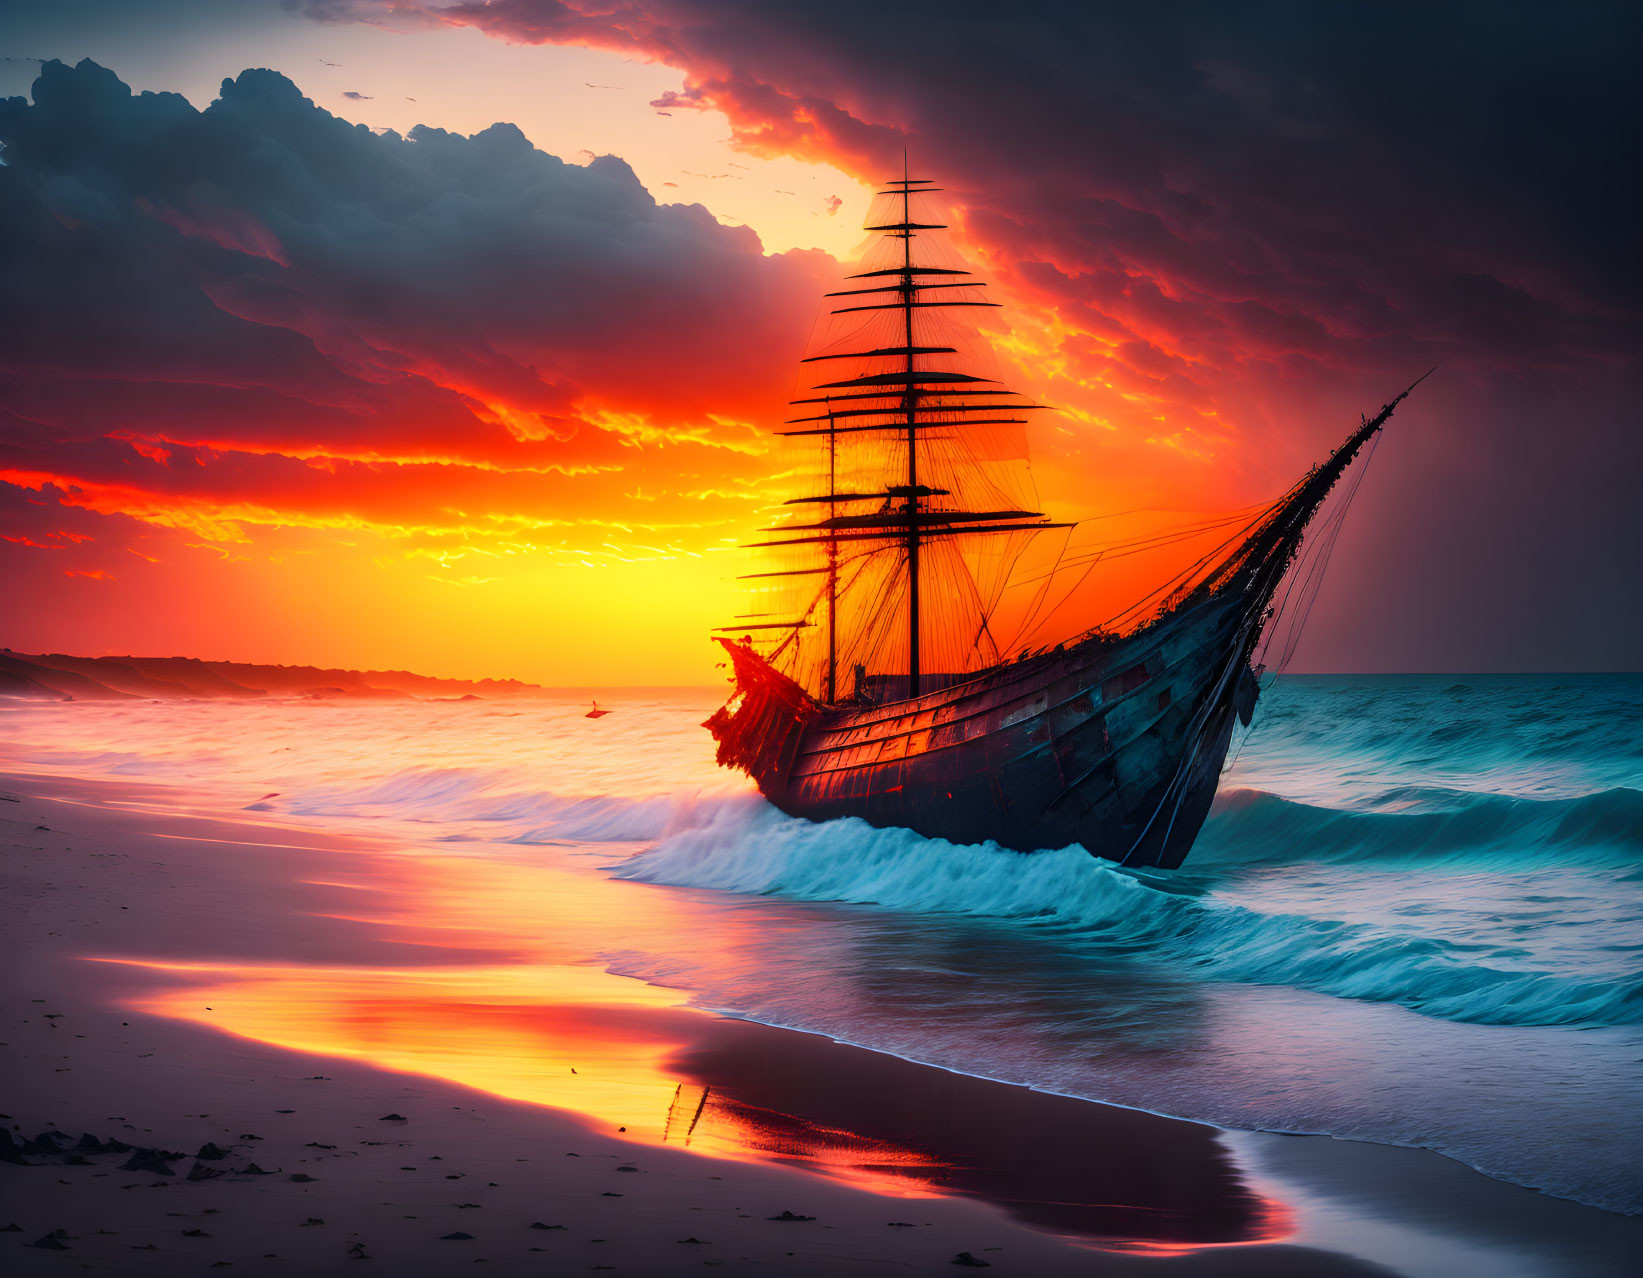 Sunset shipwreck on beach with orange skies and turbulent waves